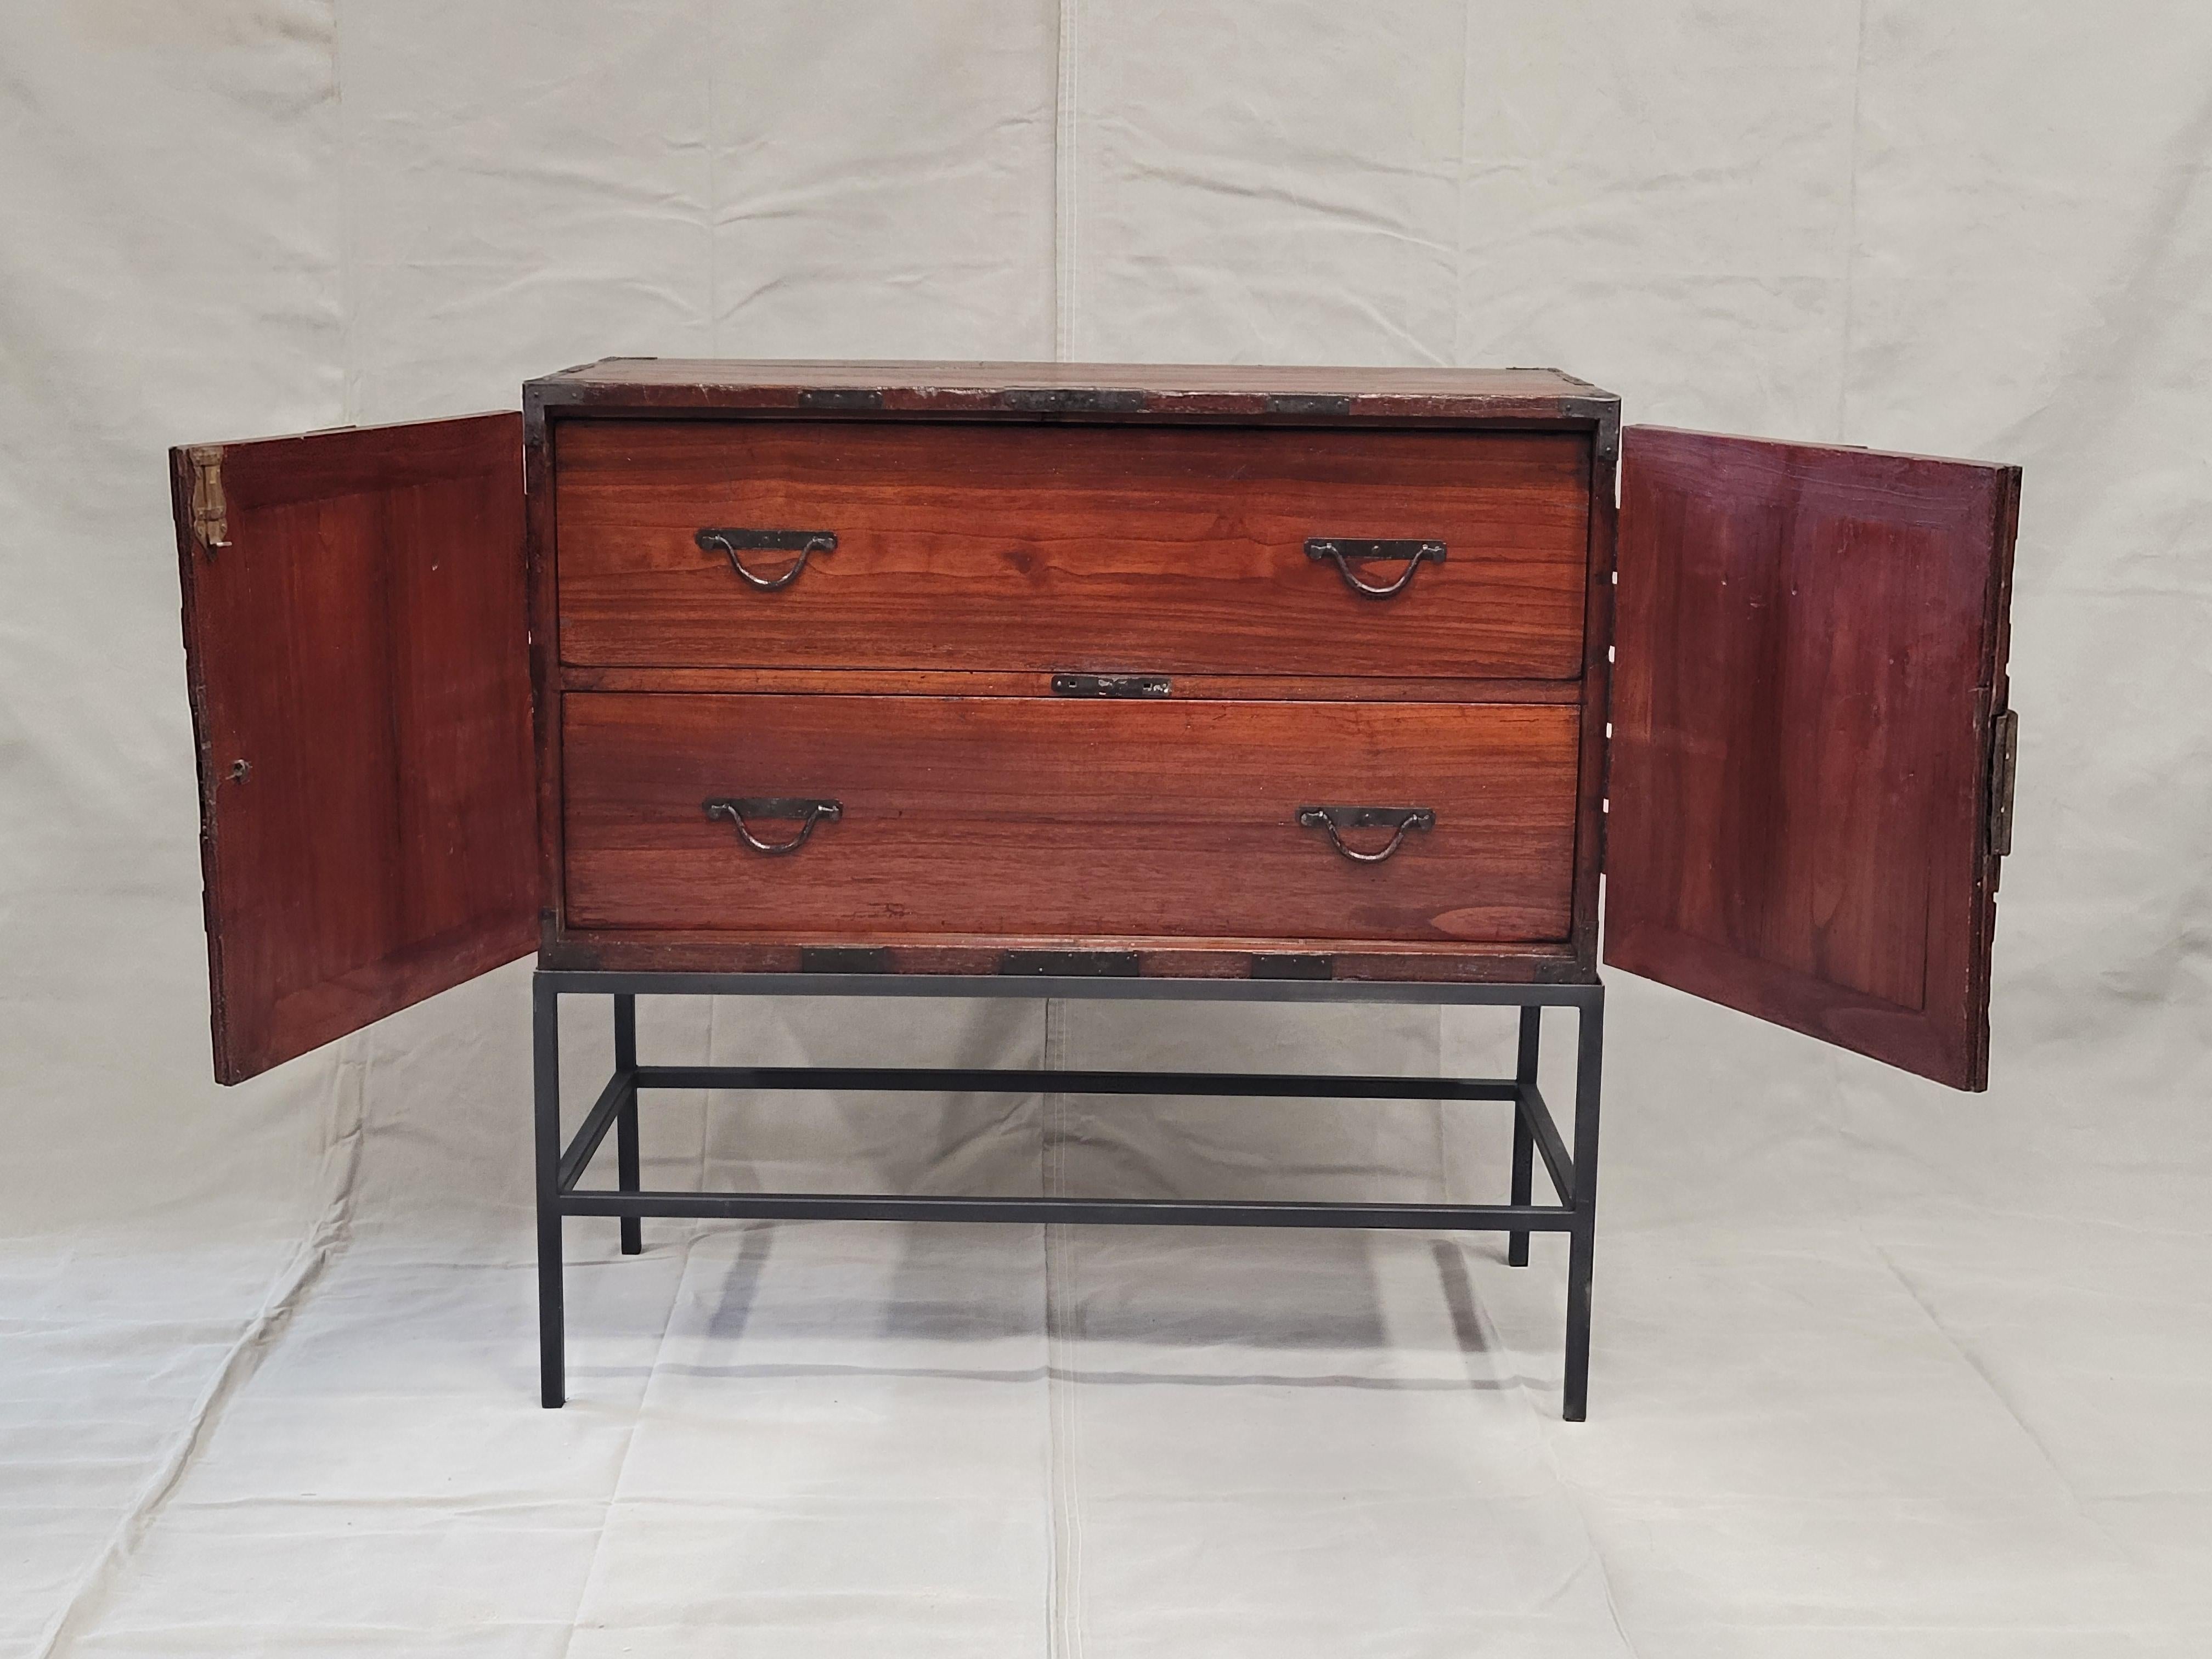 Edo Antique Japanese Tansu Chest With Drawers on Contemporary Metal Stand Console For Sale